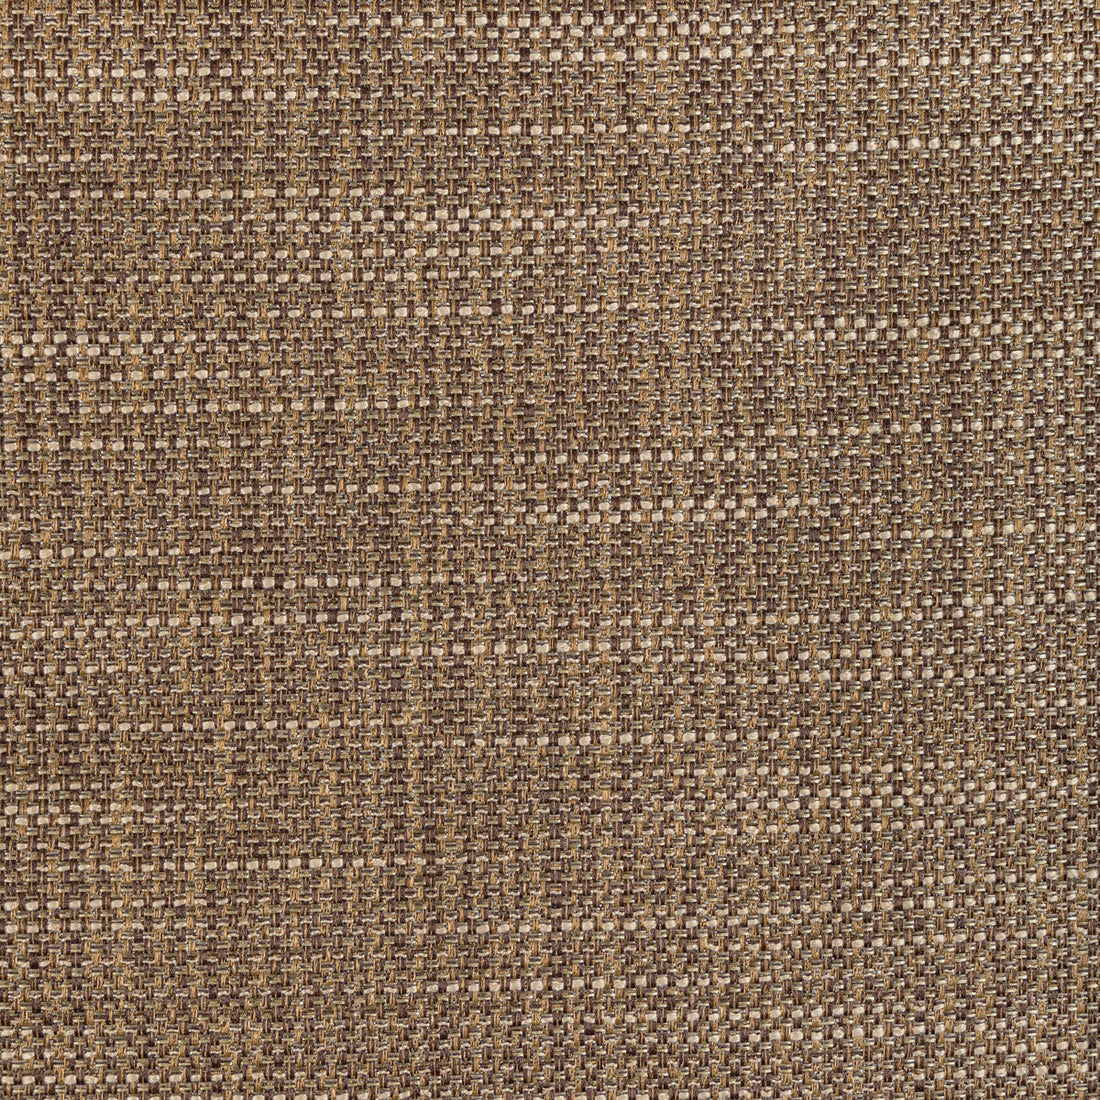 Luma Texture fabric in walnut color - pattern 4947.166.0 - by Kravet Contract in the Fr Window Luma Texture collection